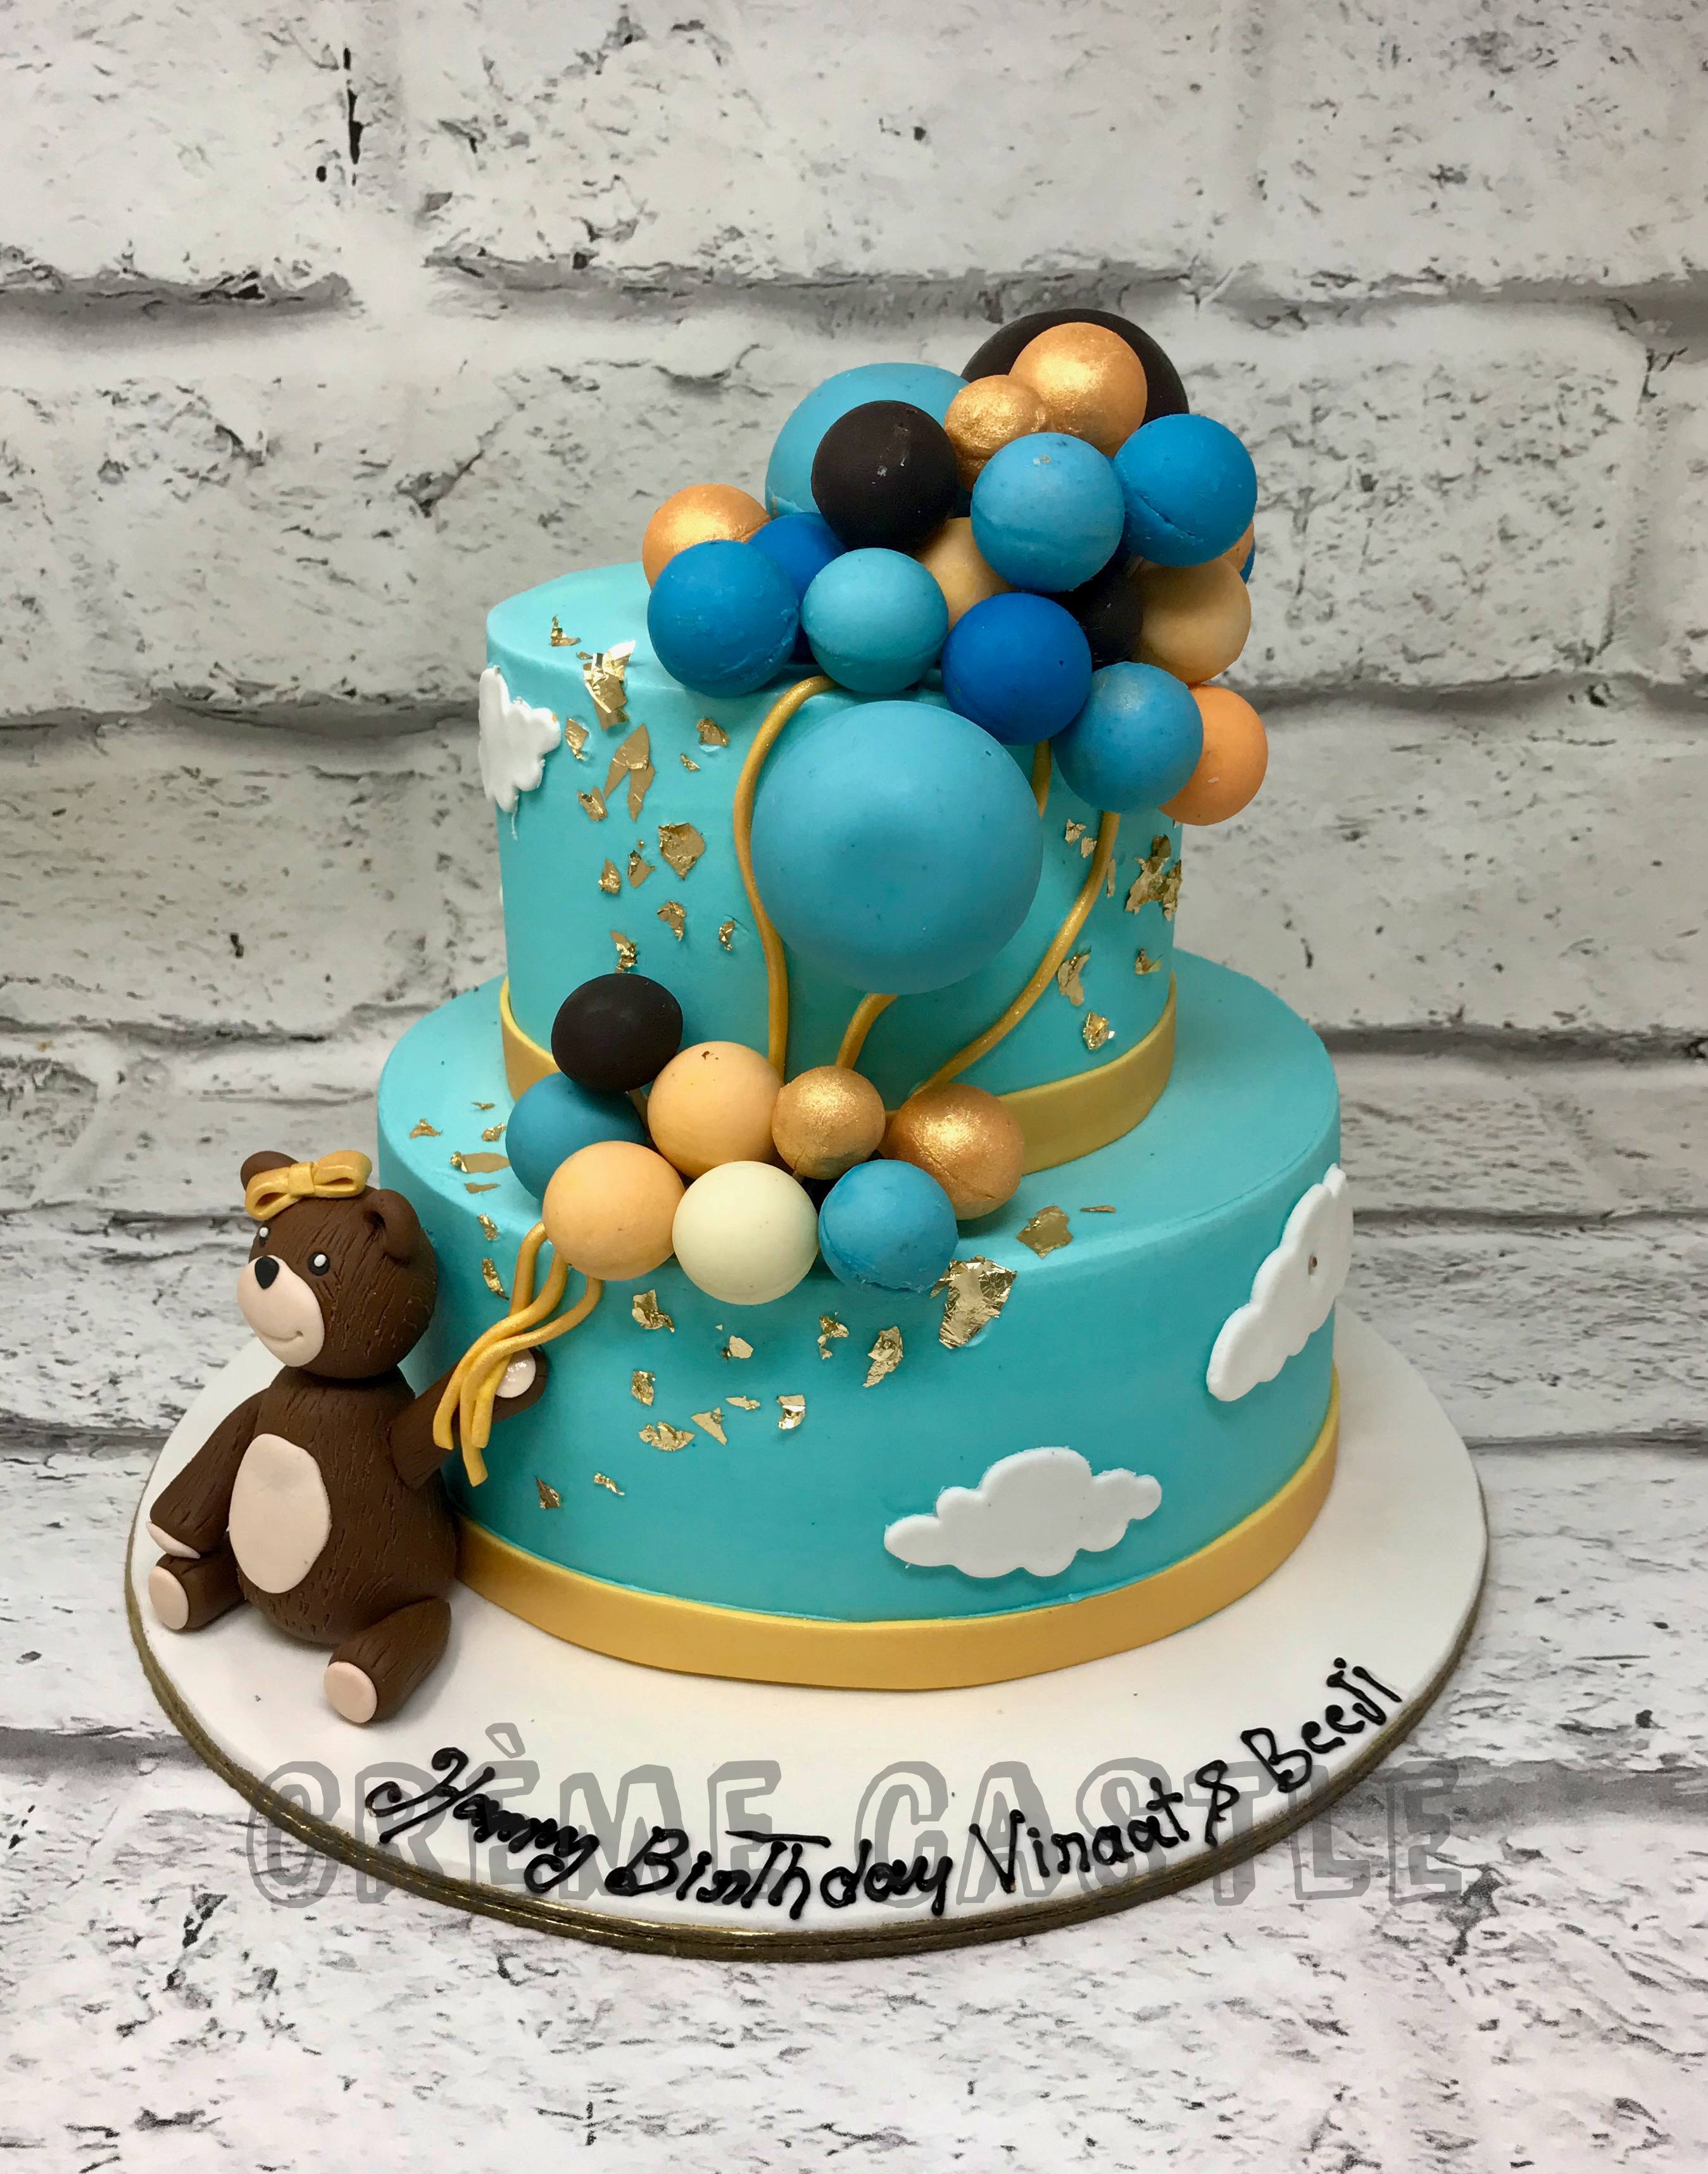 Bal... - Beyond Cakes - Home Made Cakes, Cookies and Meringues | Facebook